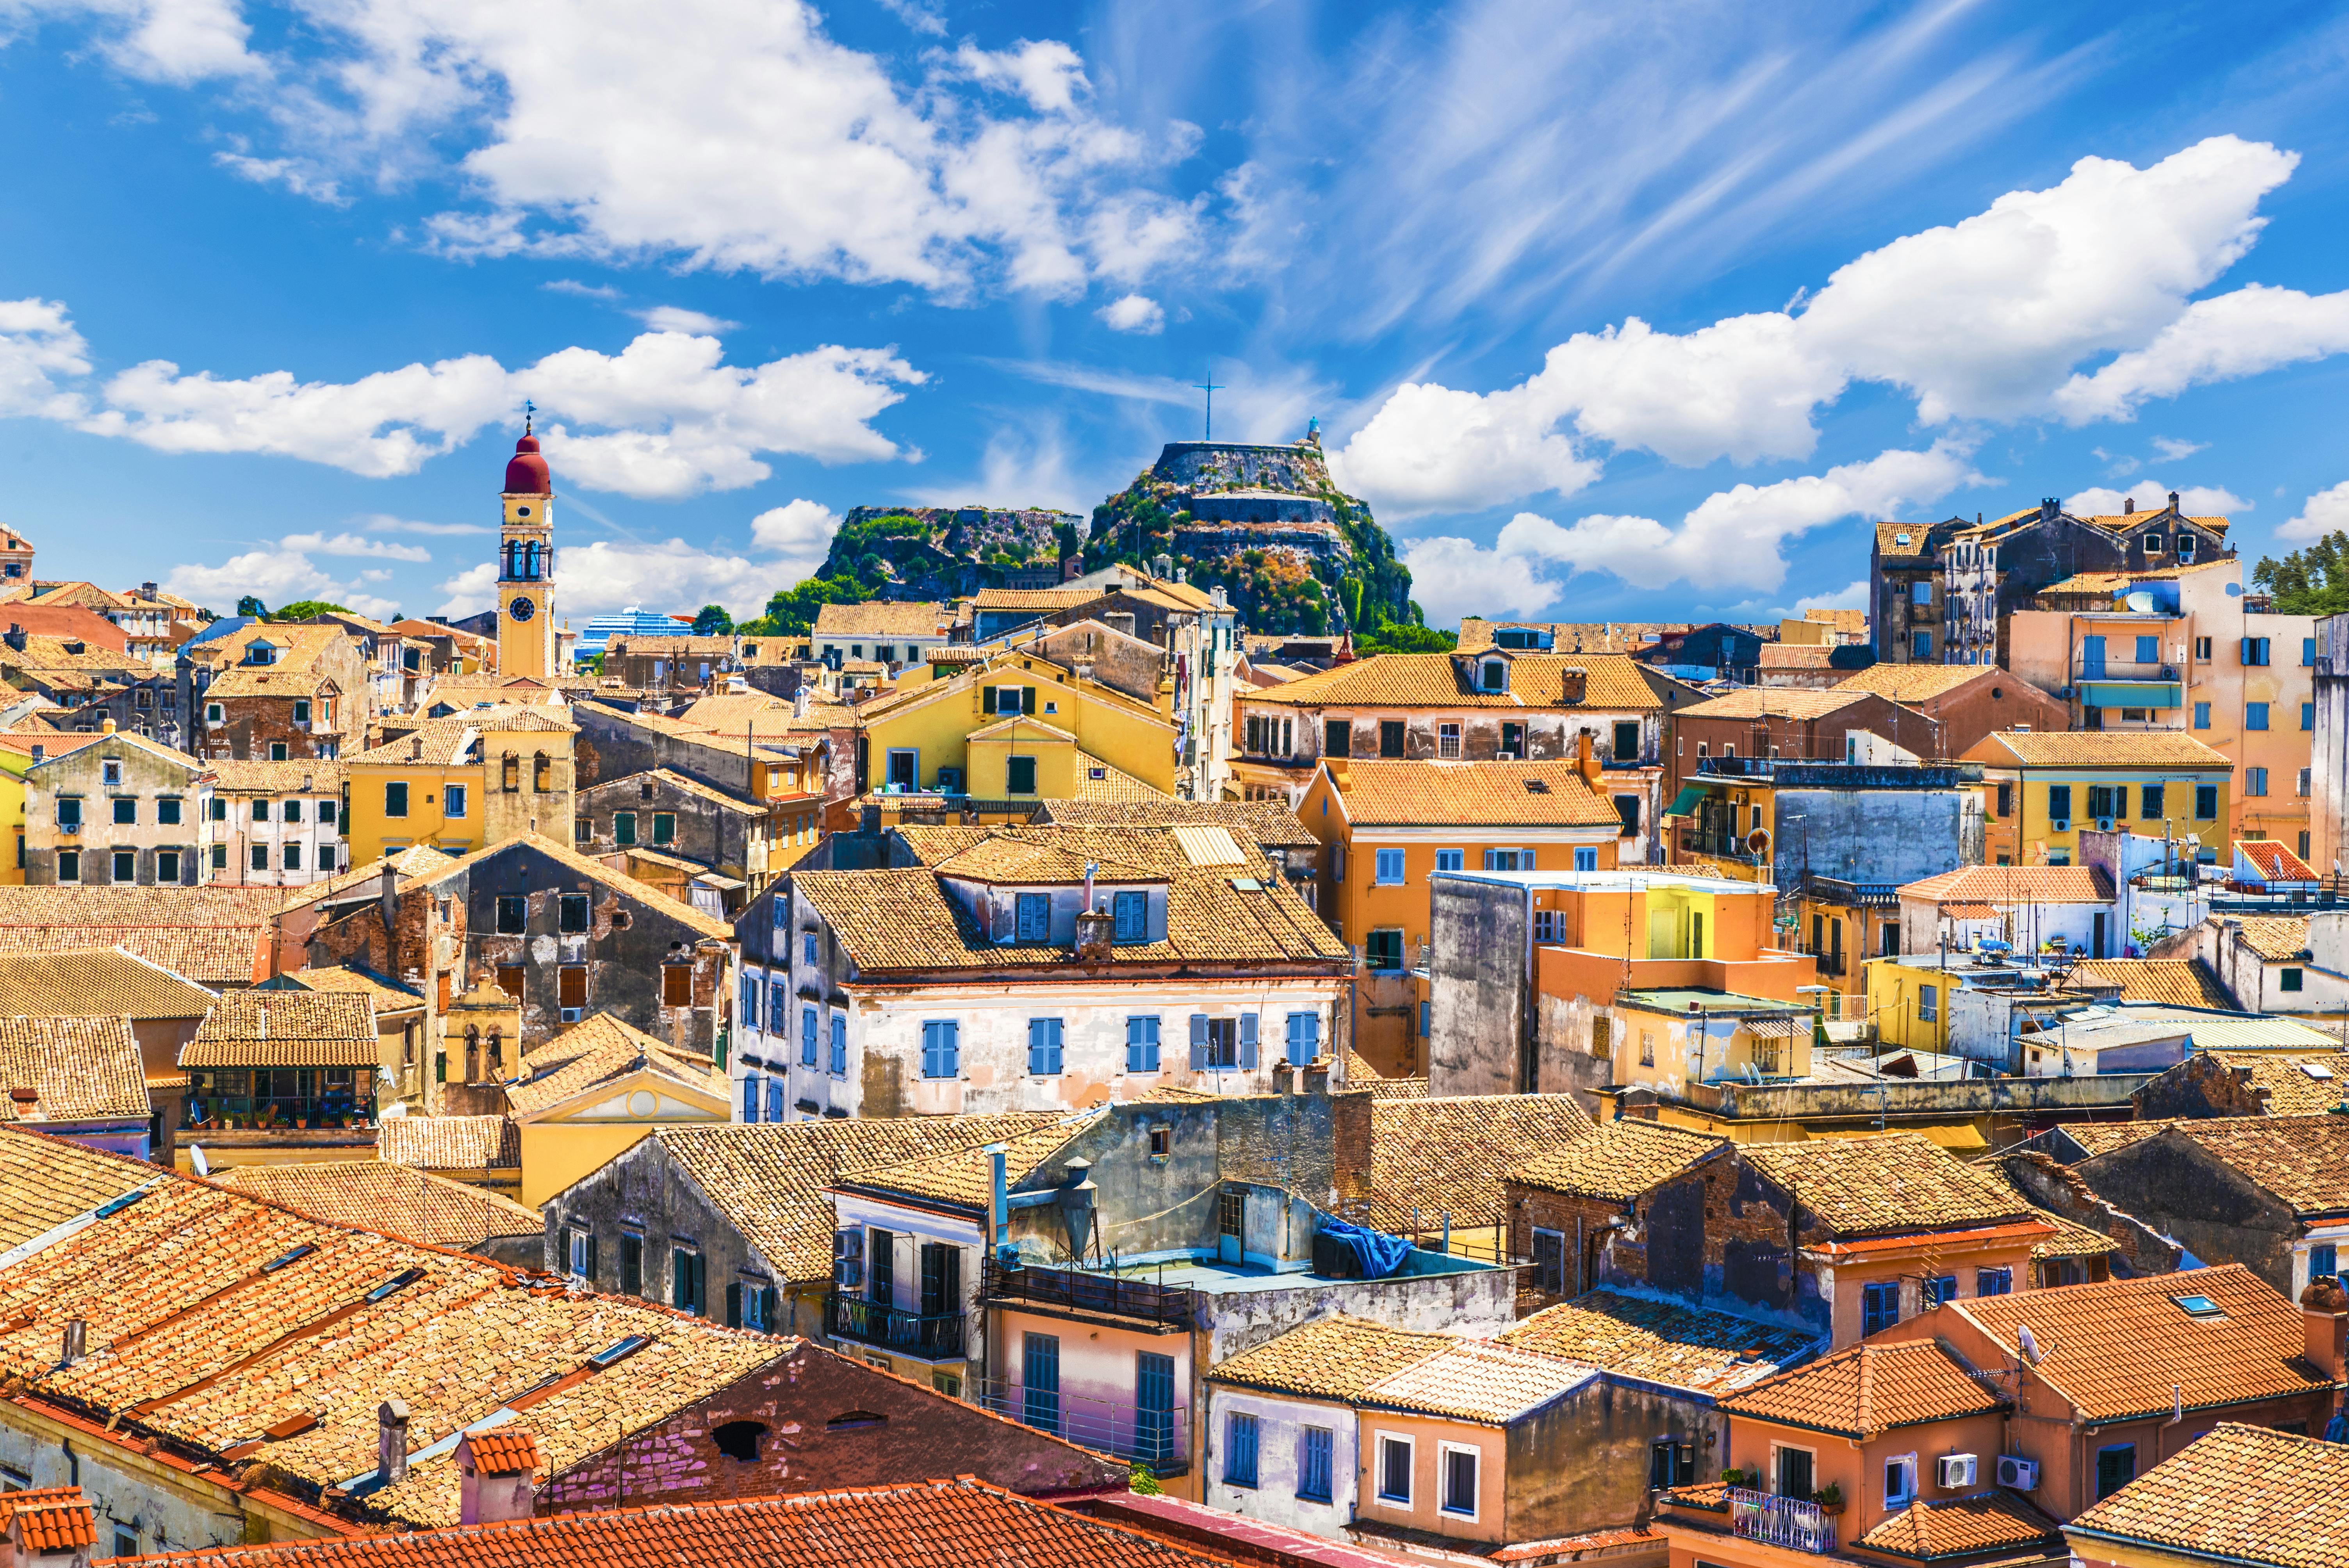 Corfu Old Town tour with Olive Oil Tasting